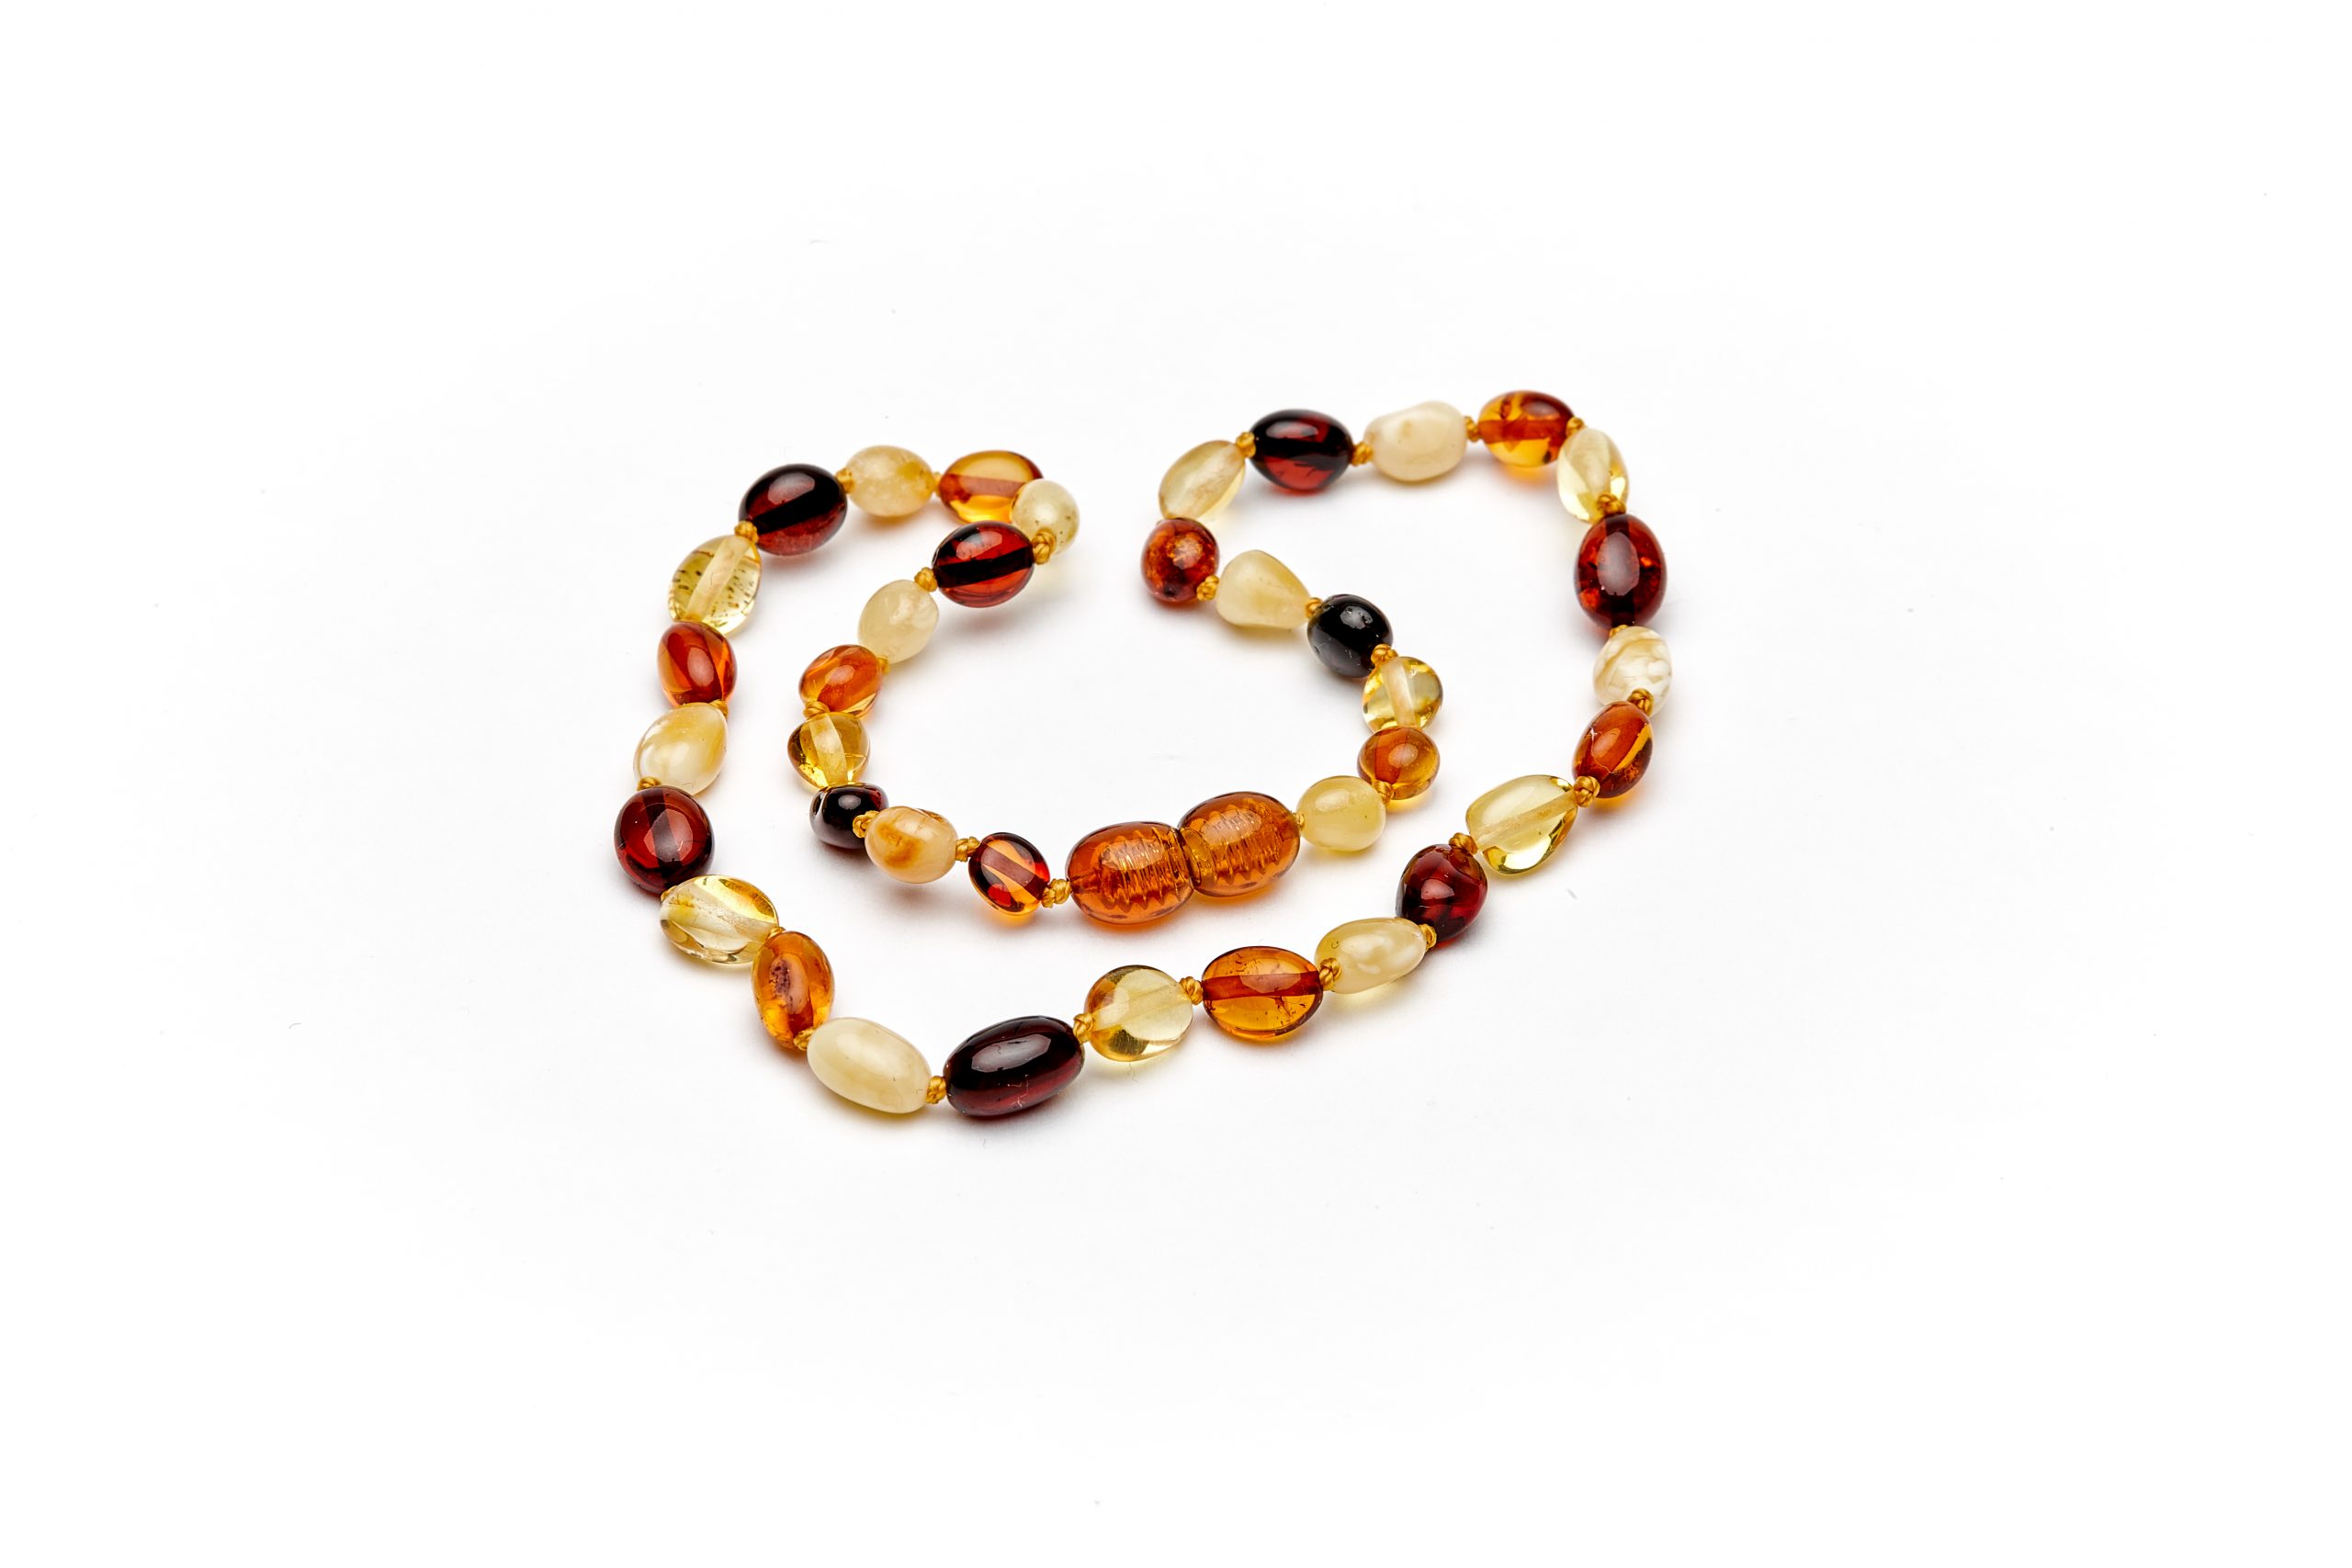 honey olive oval beads 33 cm /13 inch Genuine Baltic amber baby necklace 